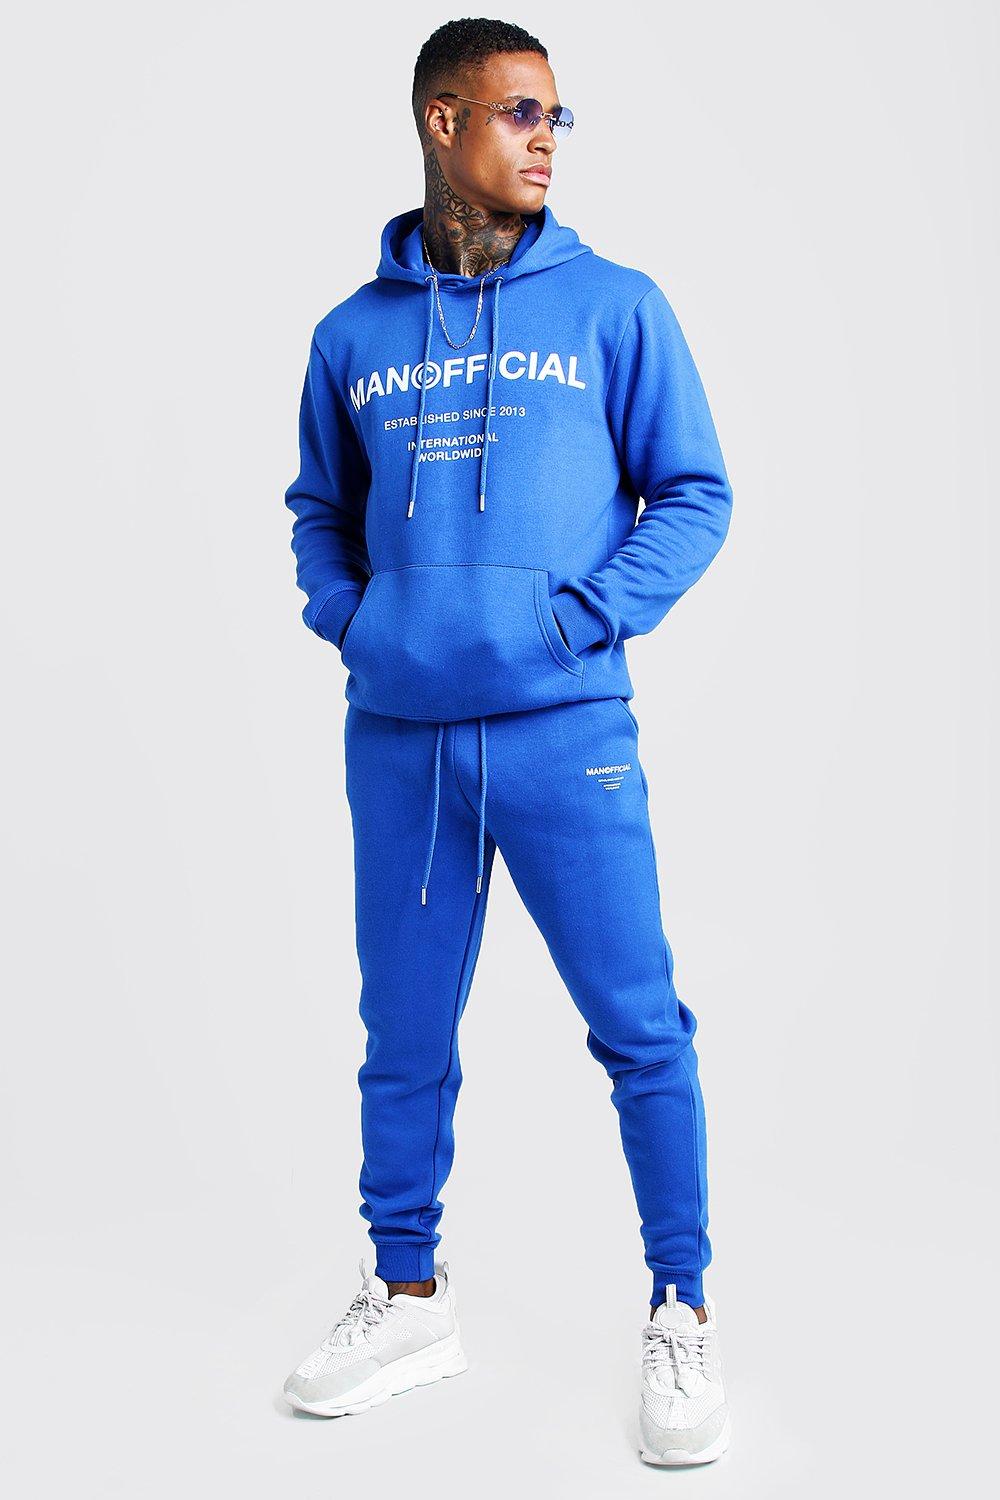 MAN Official Hooded Tracksuit - boohooMAN